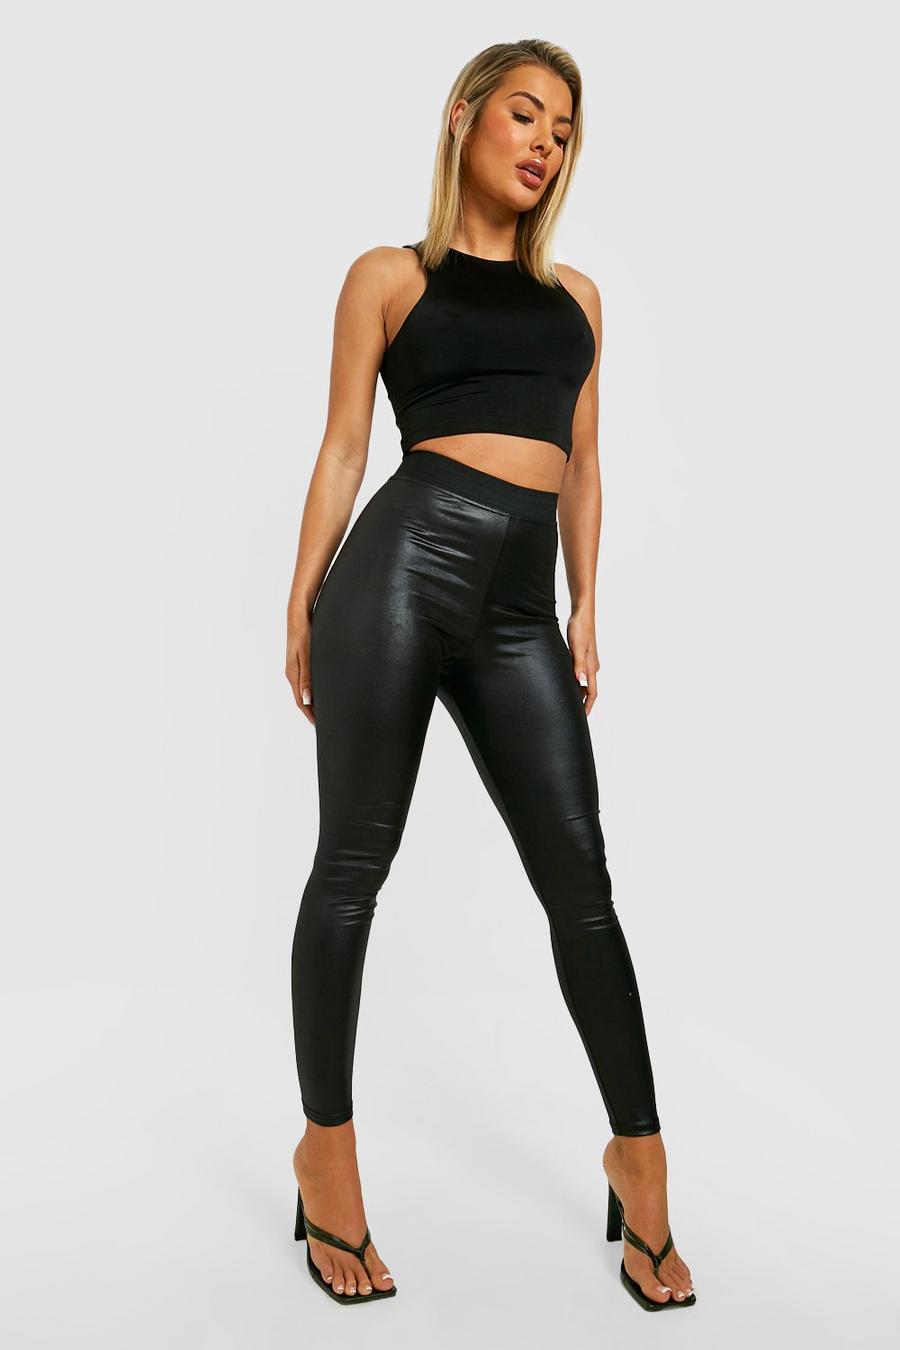 Black Cinched High Waisted Wet Look Leggings